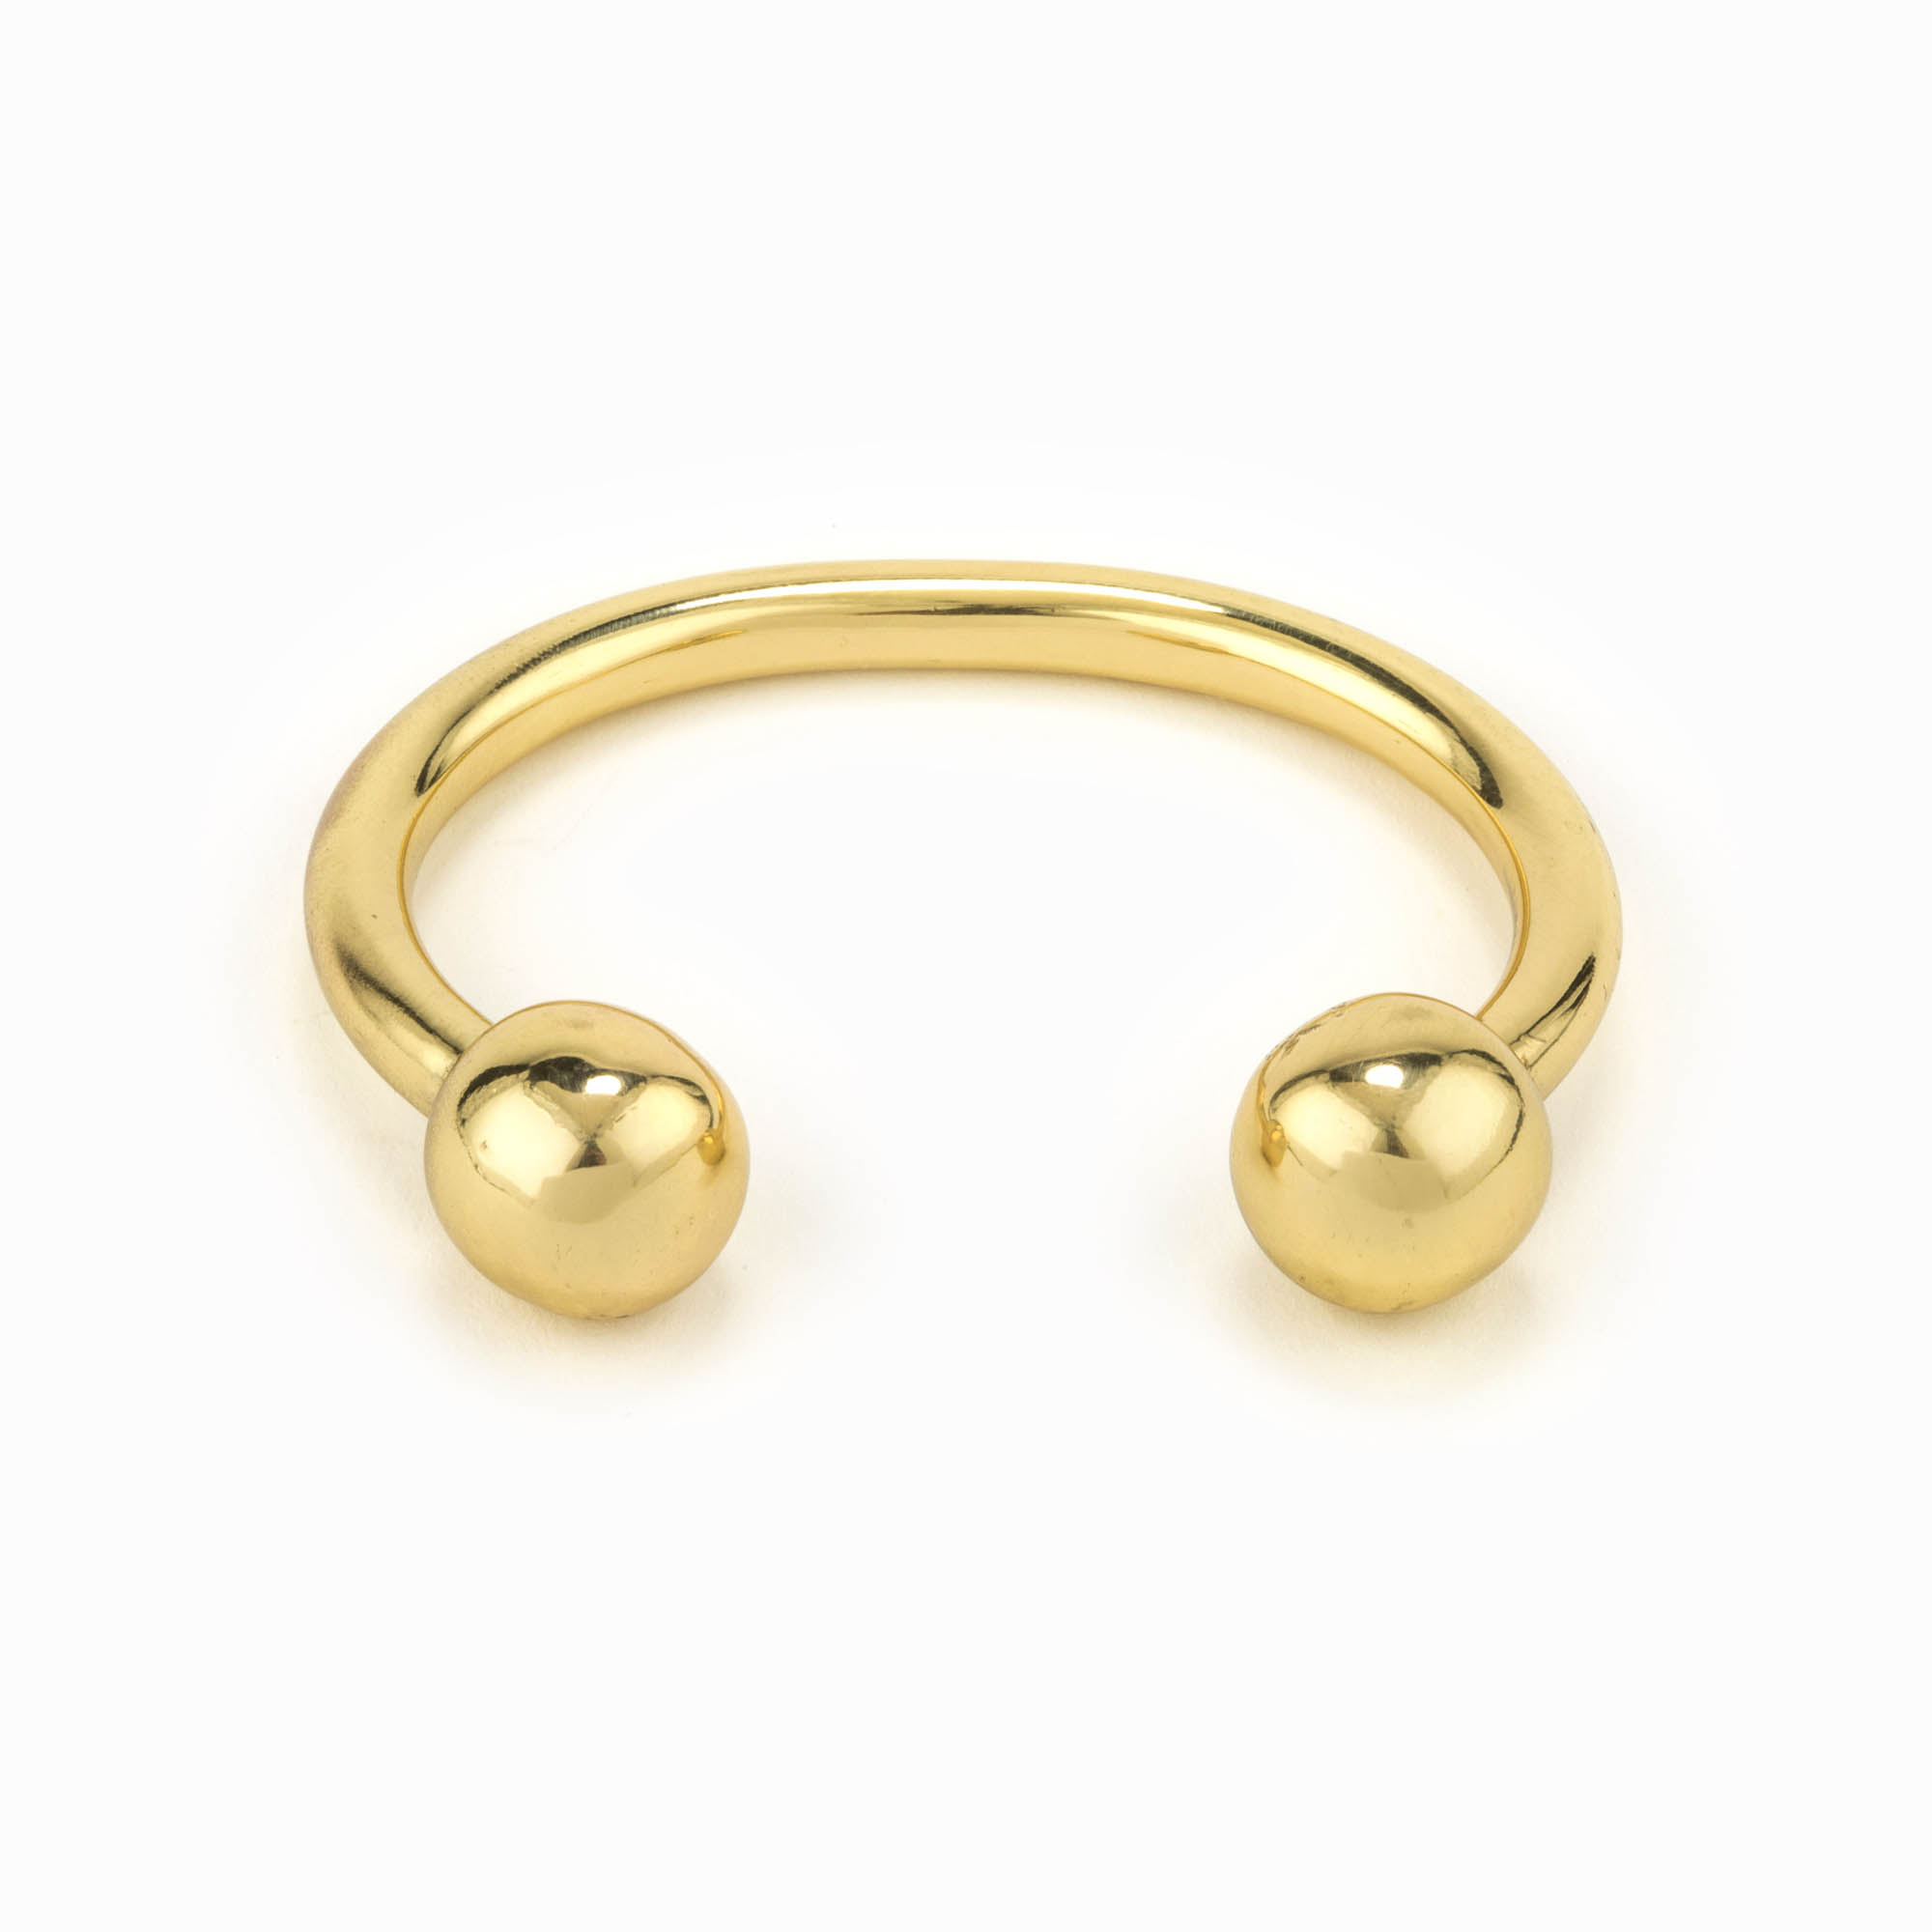 Featured image for “Lucian Brass Bracelet”